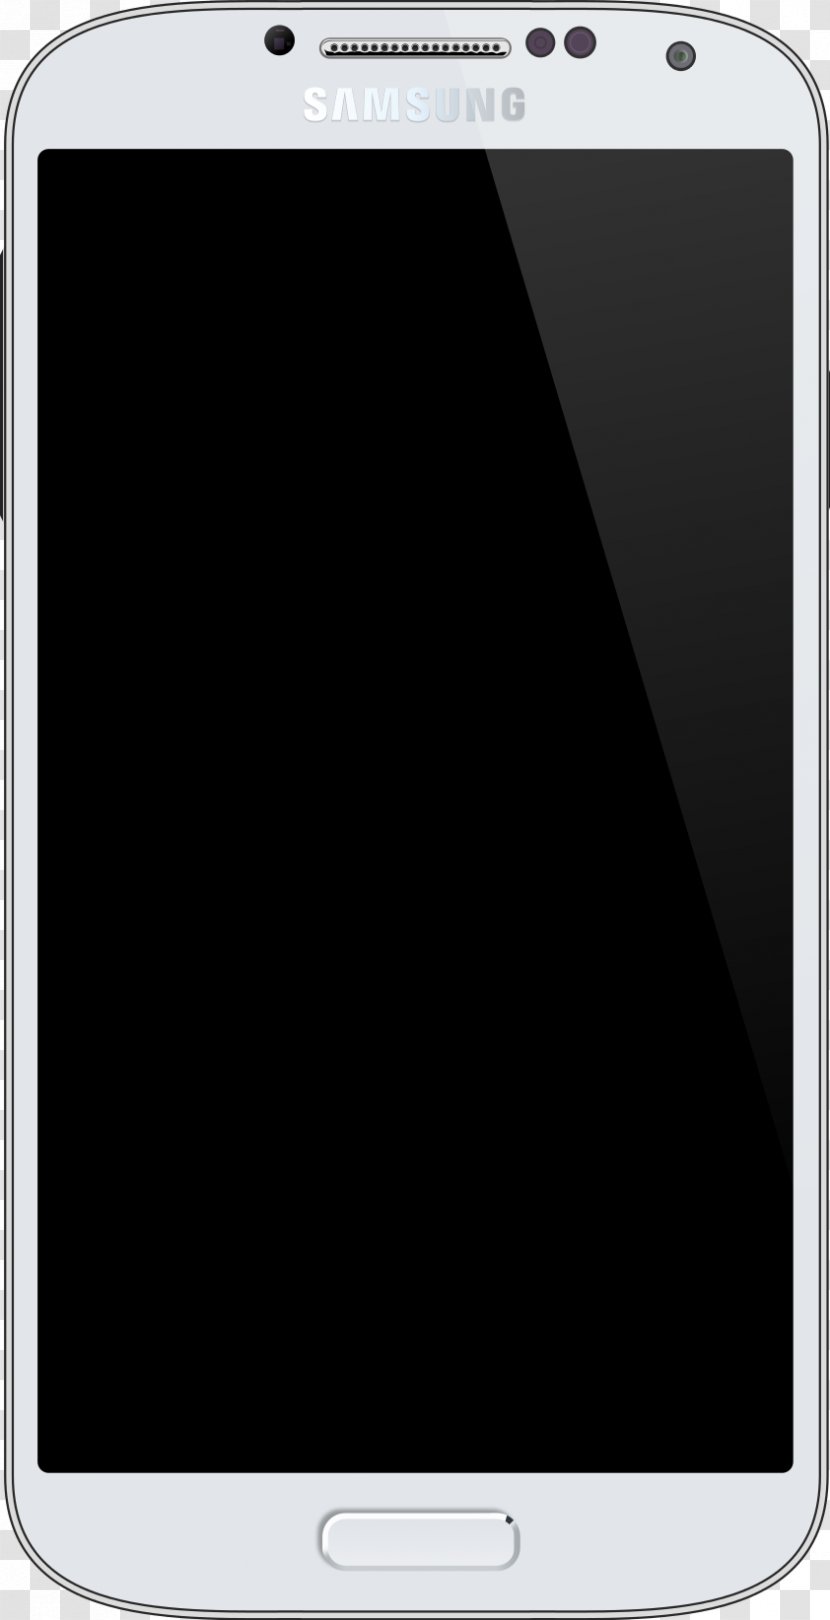 IPhone 6s Plus 7 IPod Touch Telephone - Iphone 6 - Samsung Transparent PNG